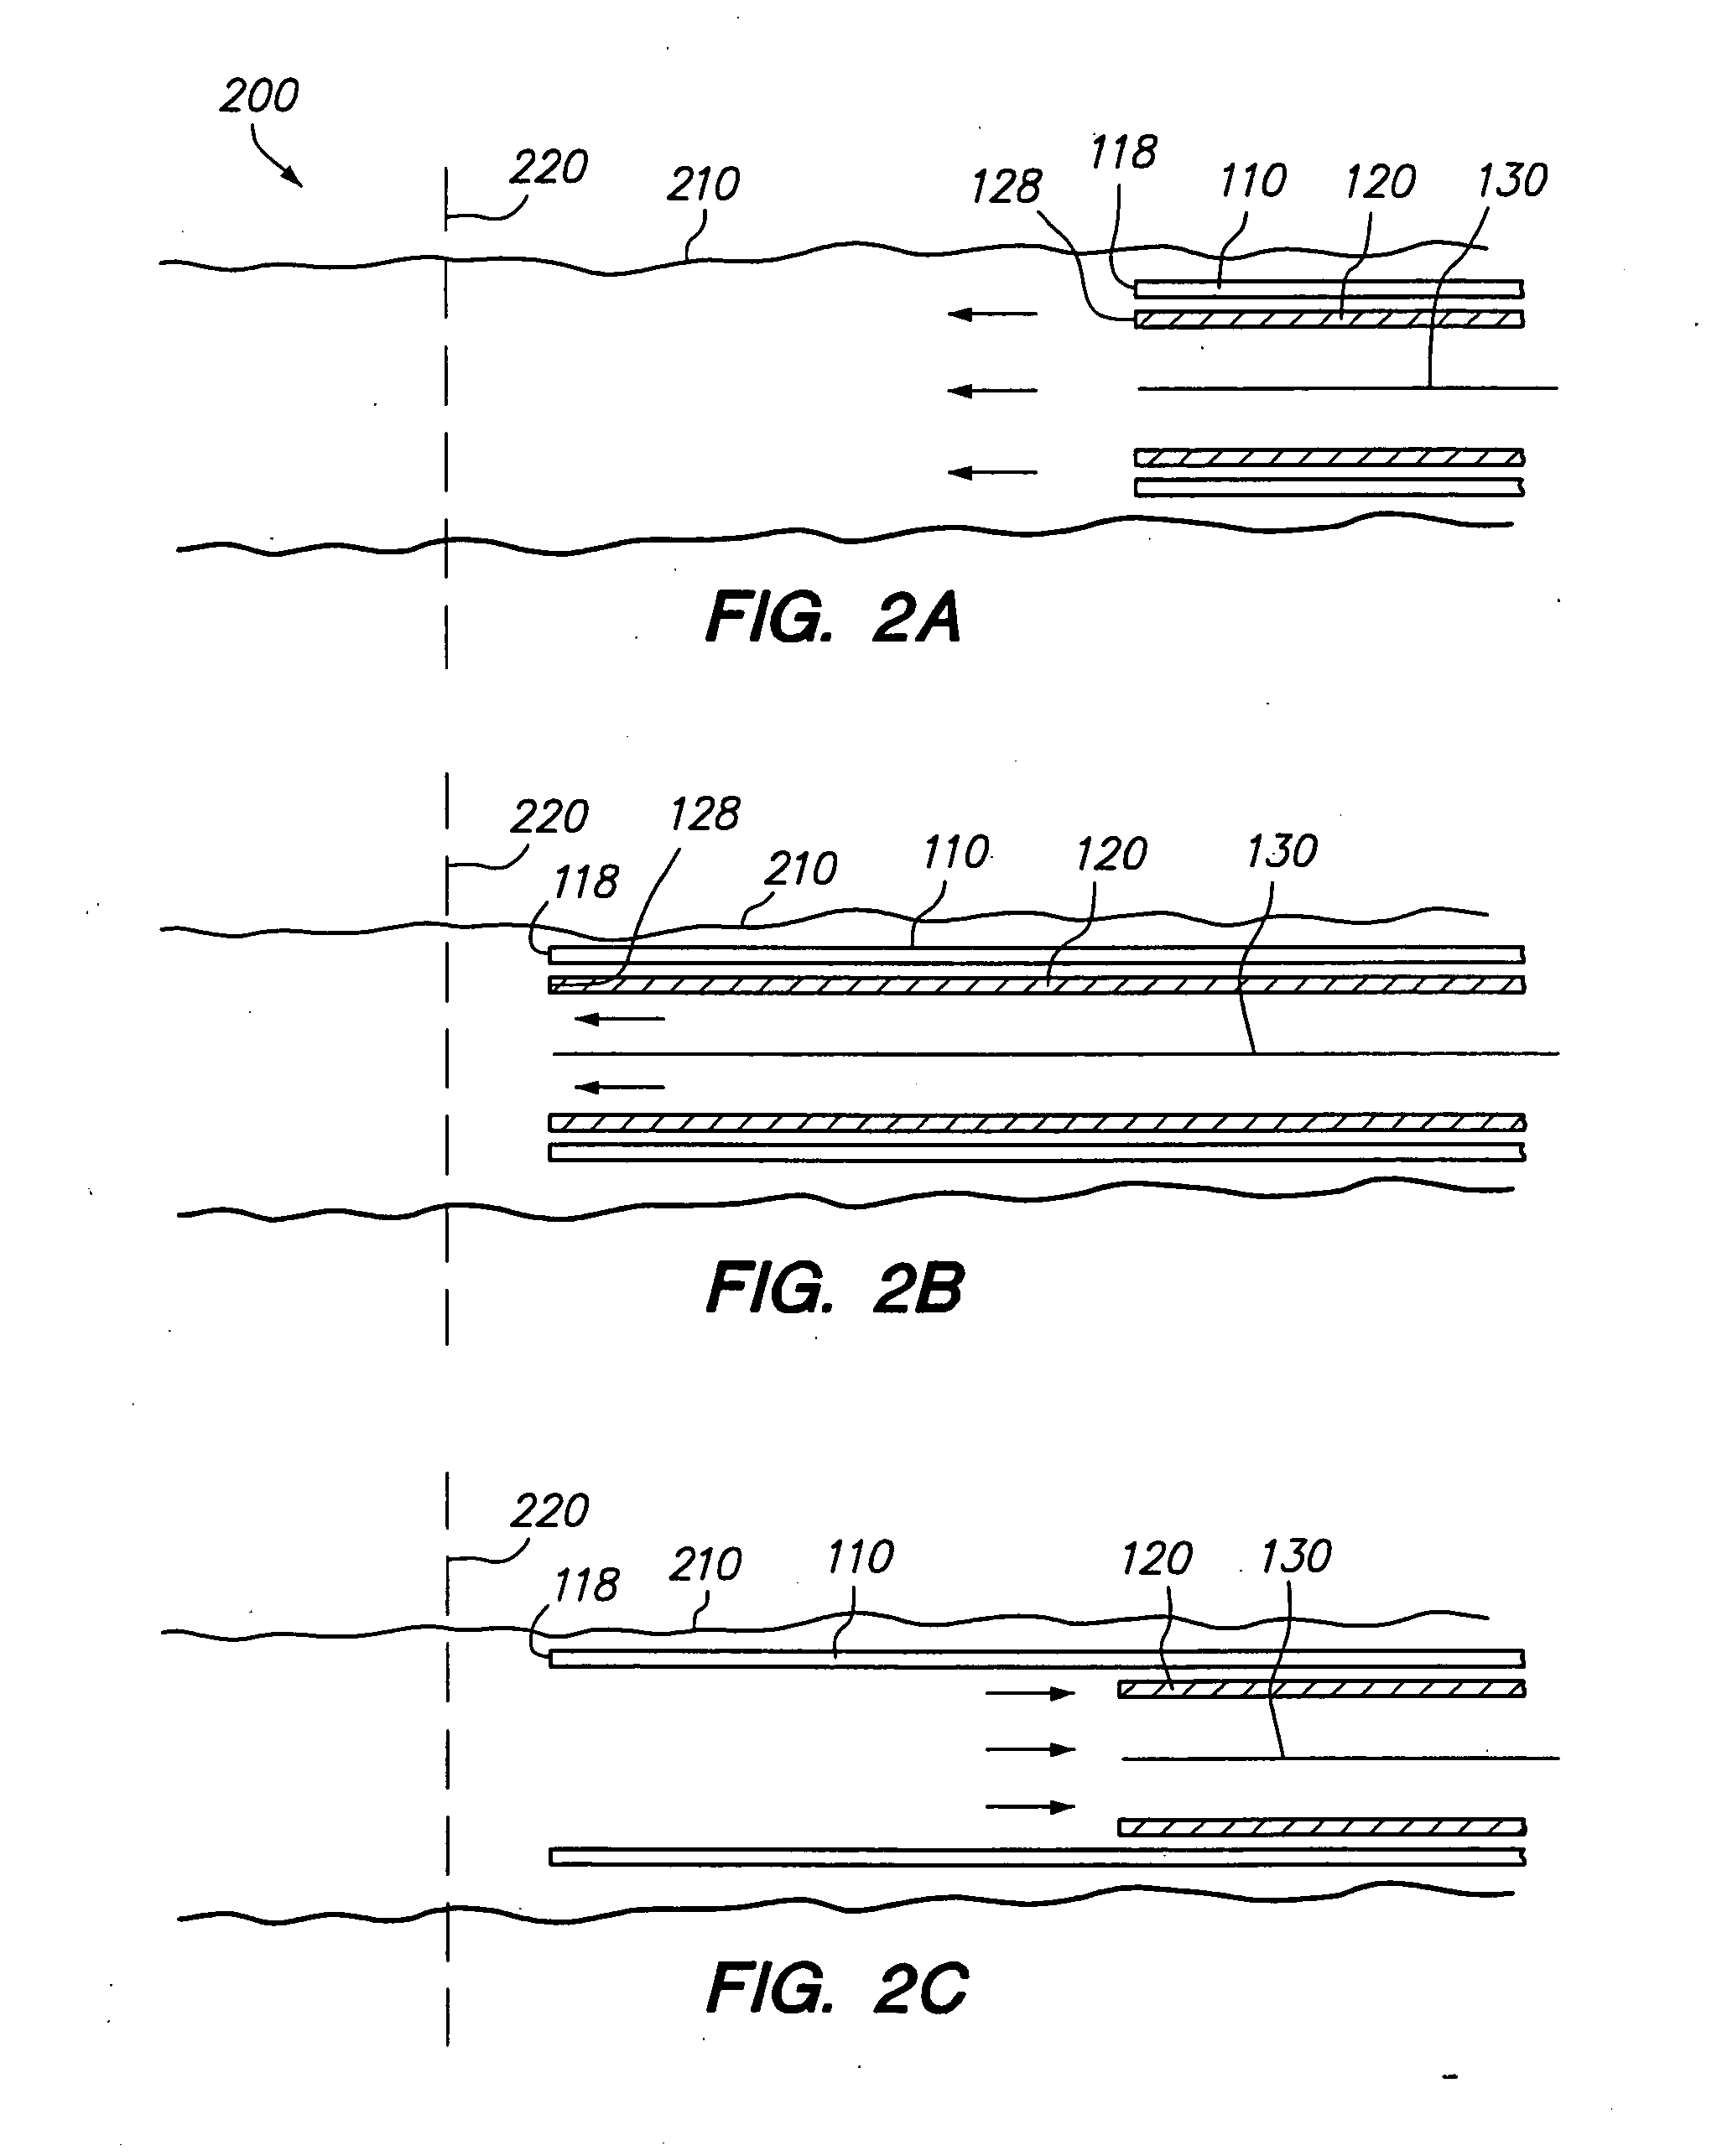 Method and system for delivering an implant utilizing a lumen reducing member